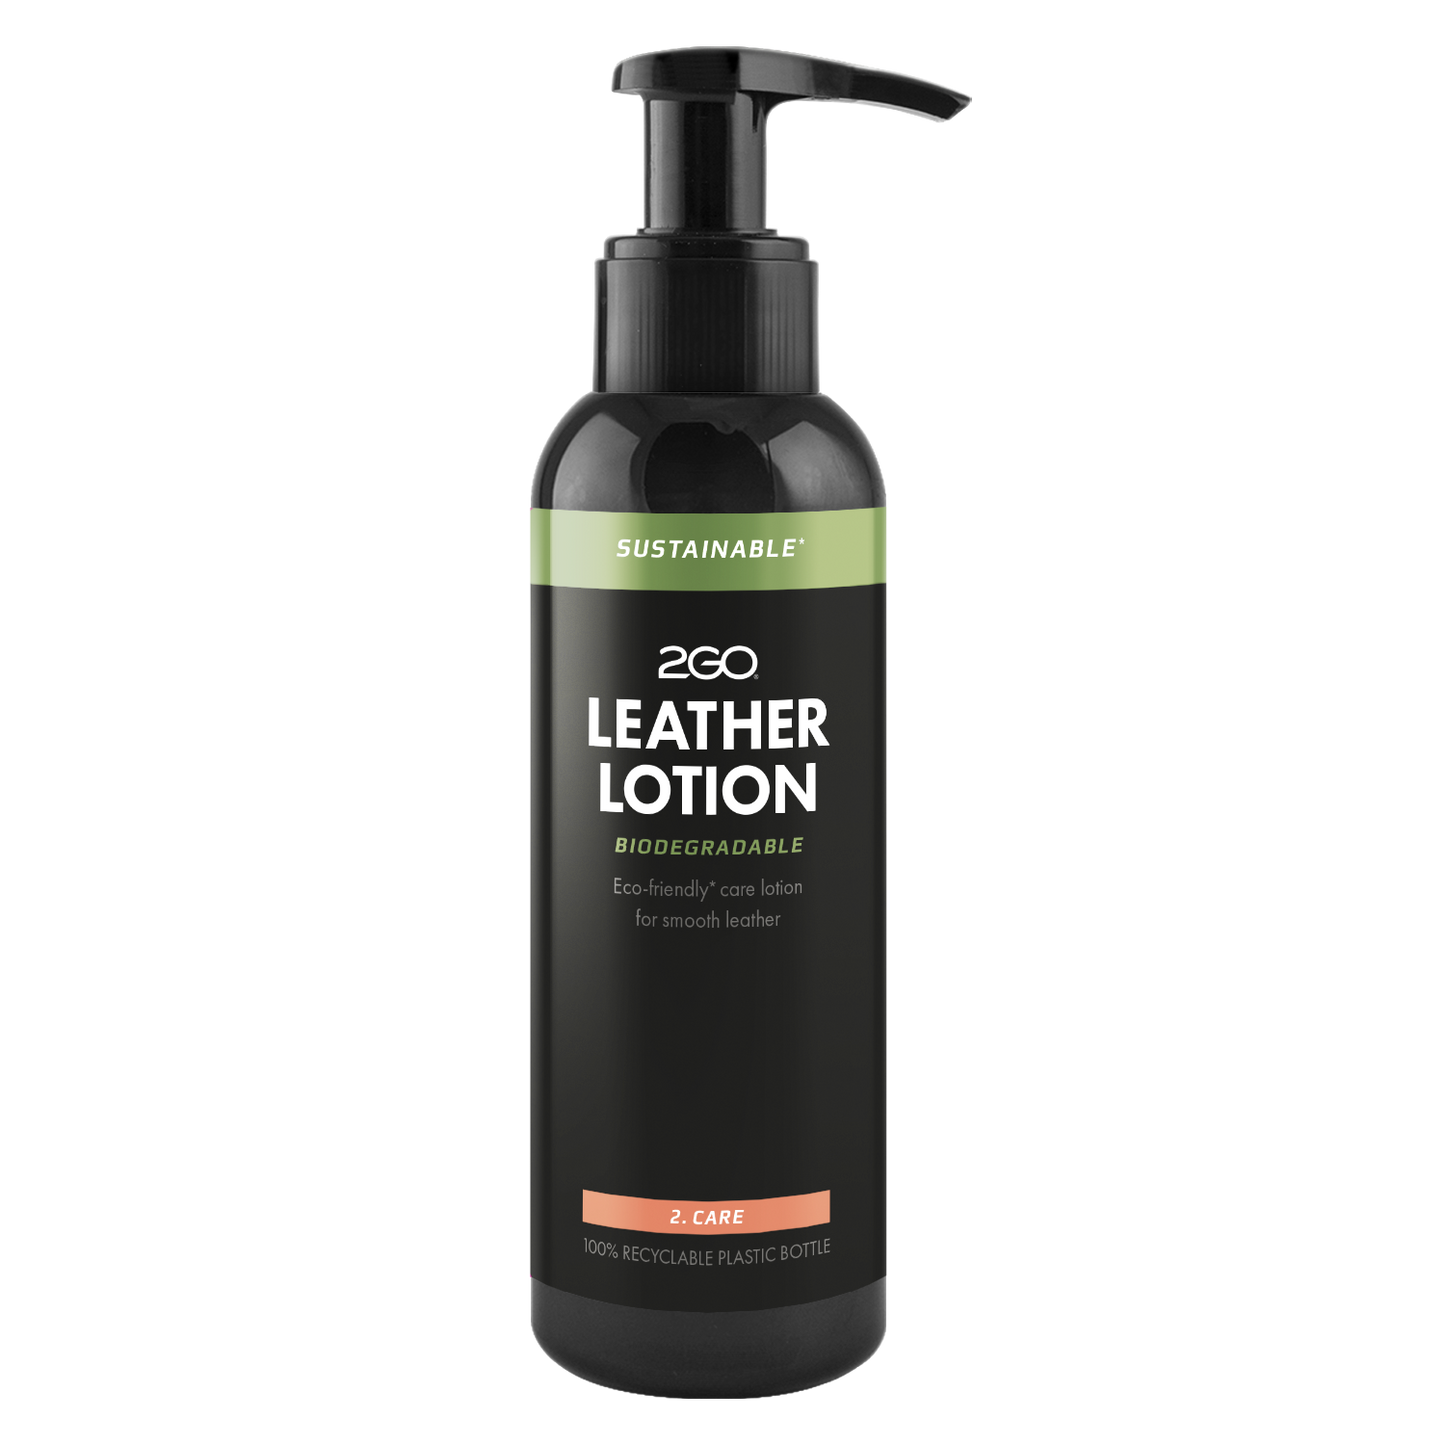 2GO Leather Lotion